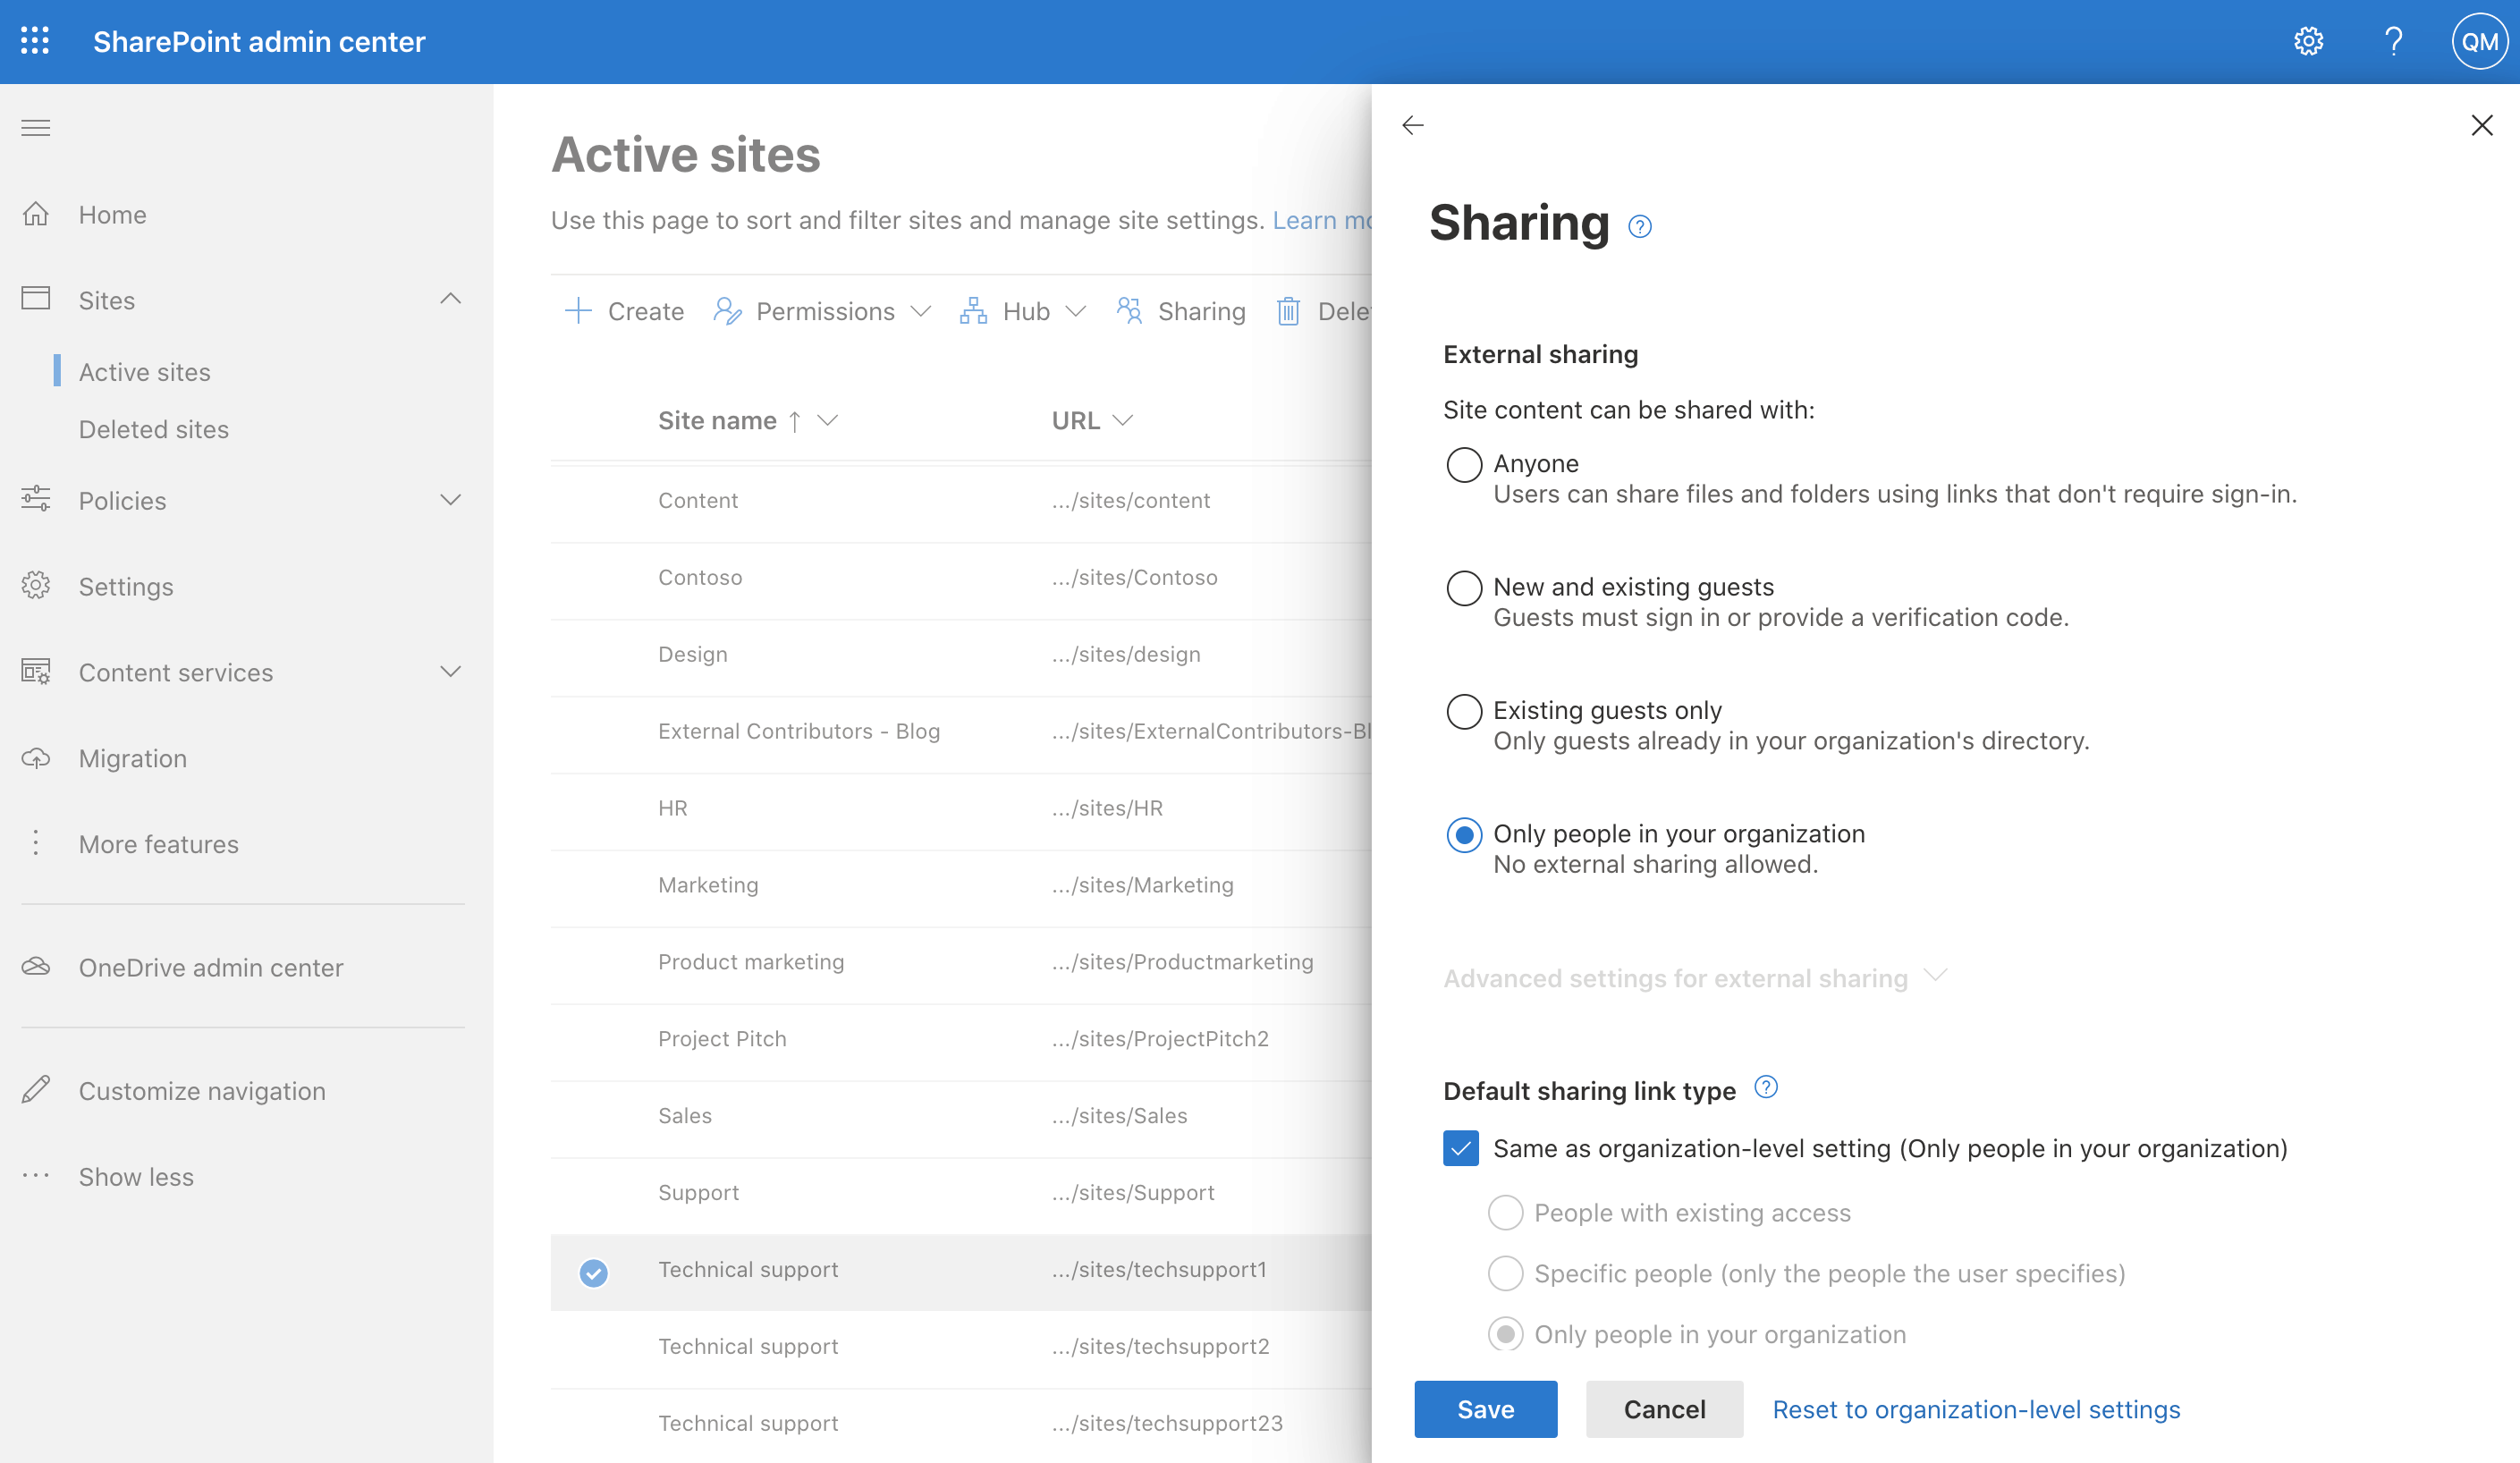 Screenshot of Sharing settings in the SharePoint admin center.